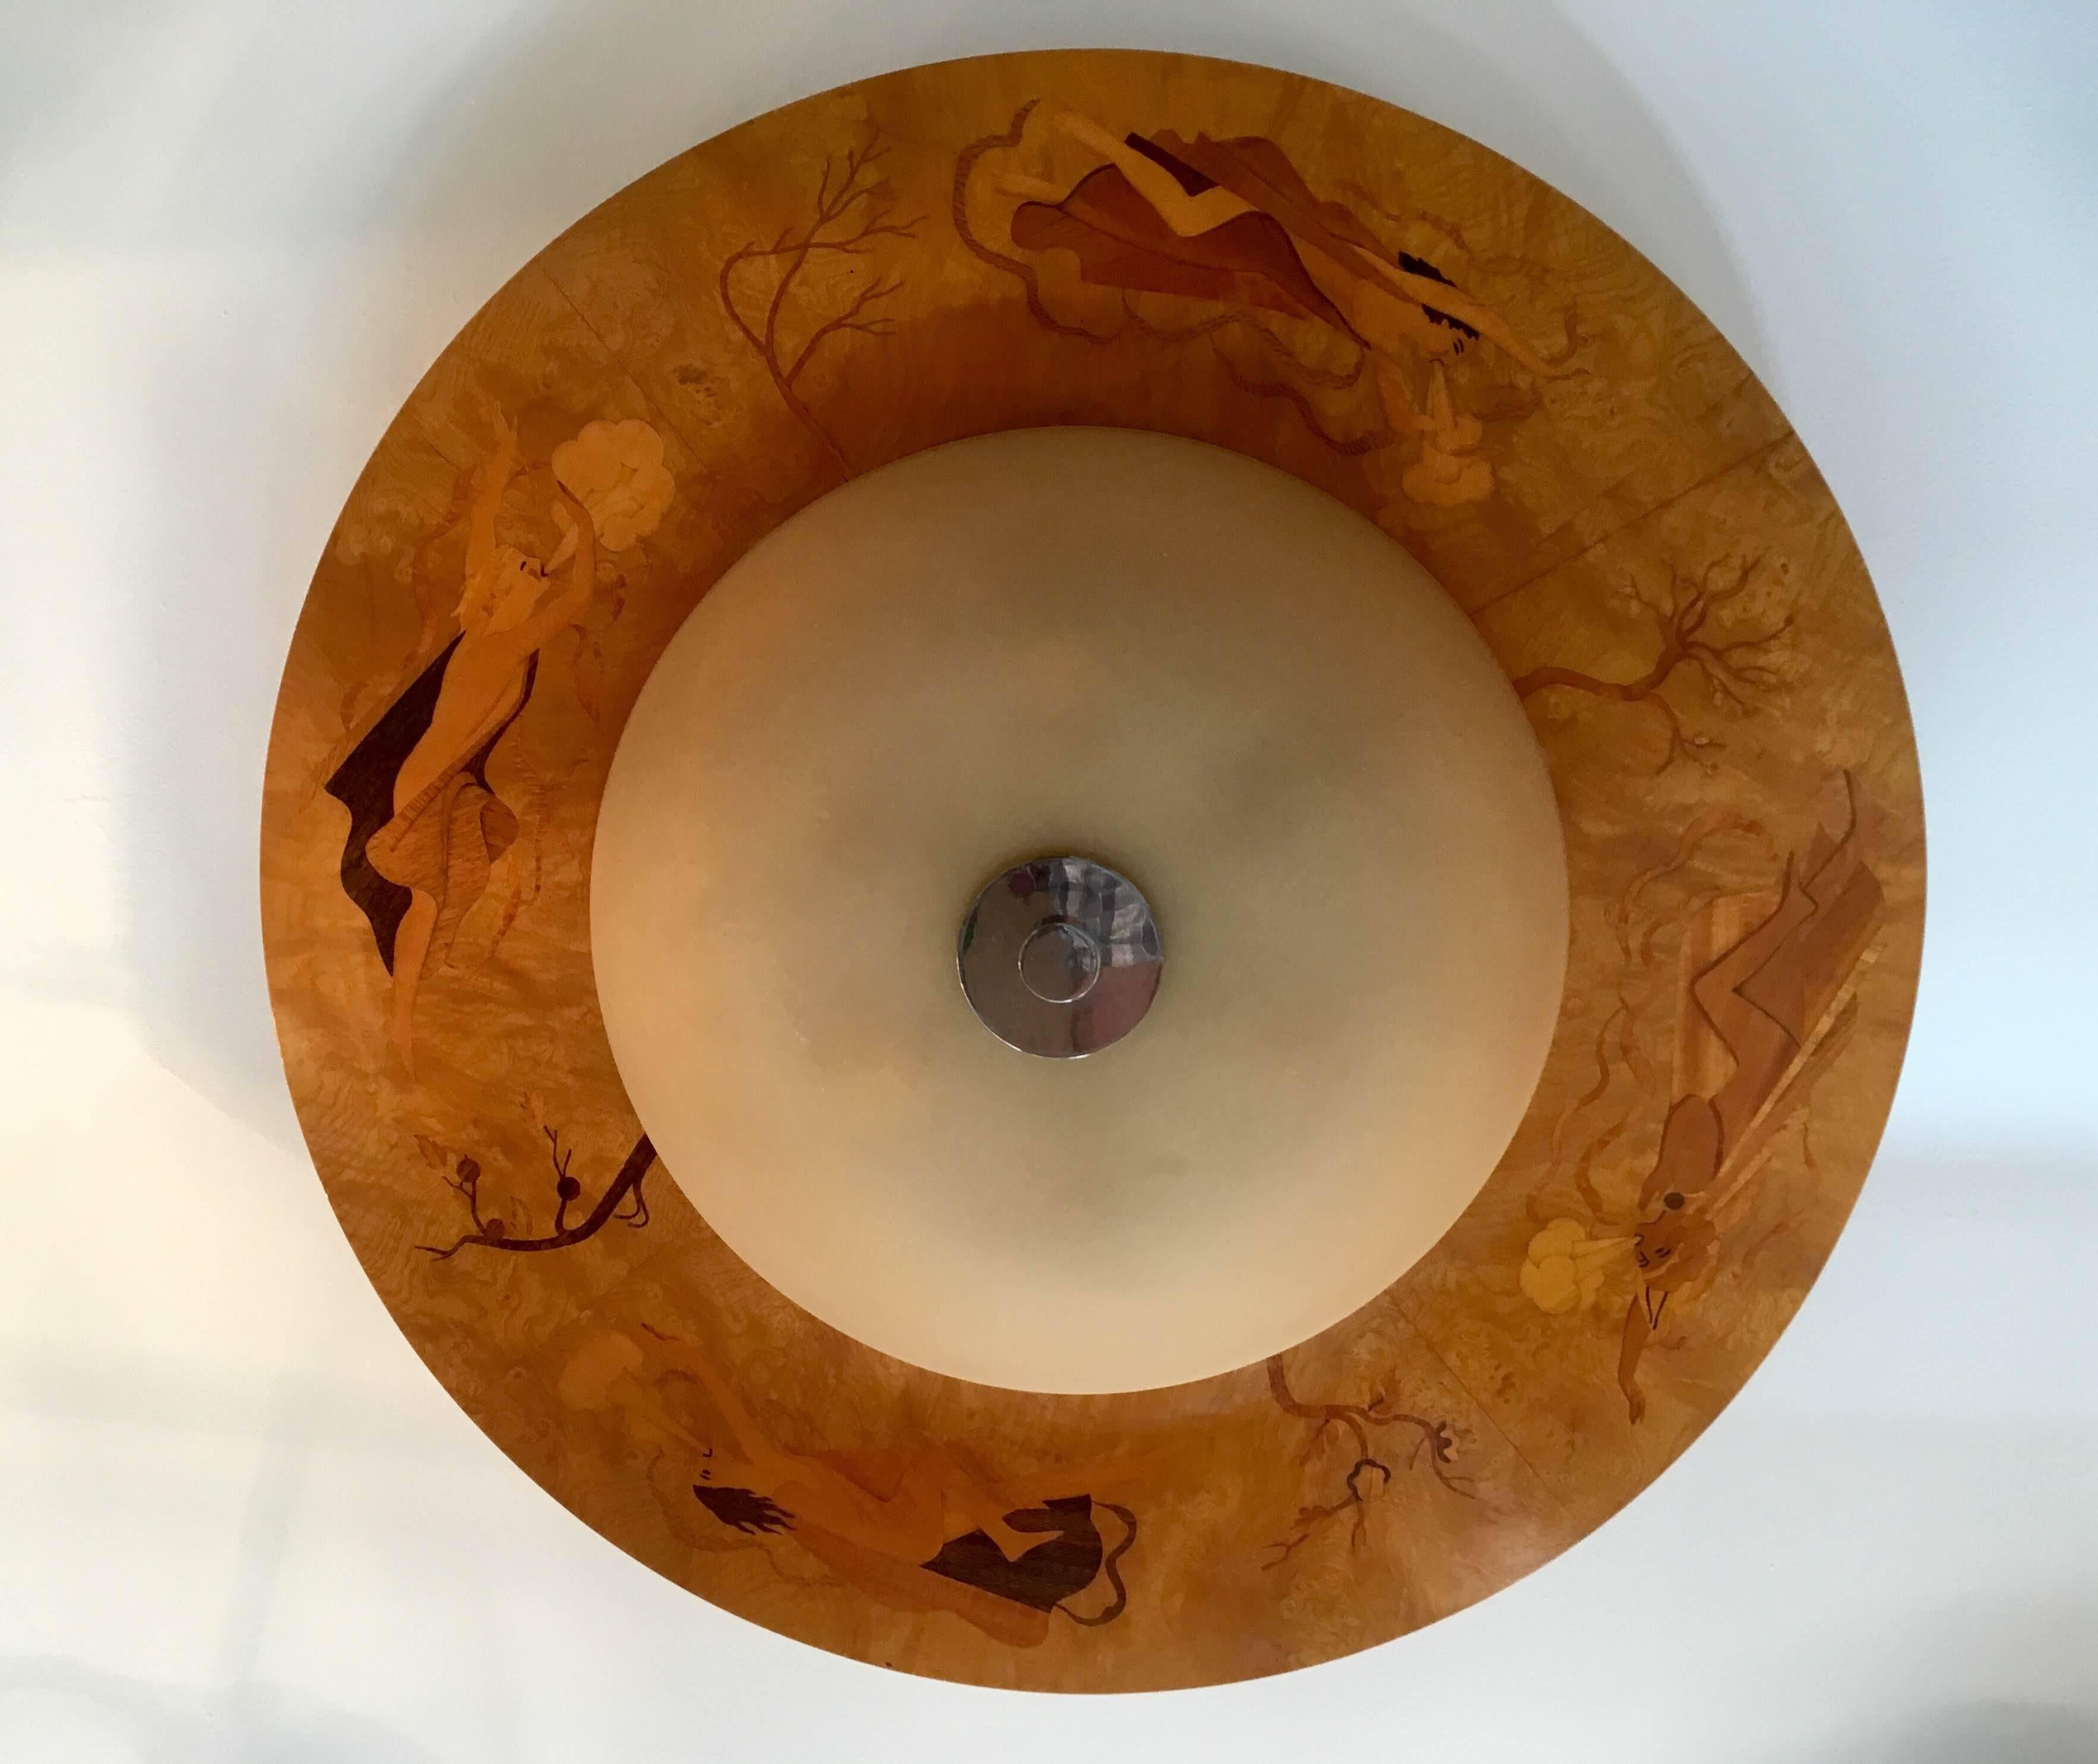 An original hand crafter inlaid Swedish flush ceiling light with a custard glass shade by Birger Ekman for Mjolby Intarsia. Newly rewired. The inlaid decorations are of Nordic gods blowing wind to the trees.